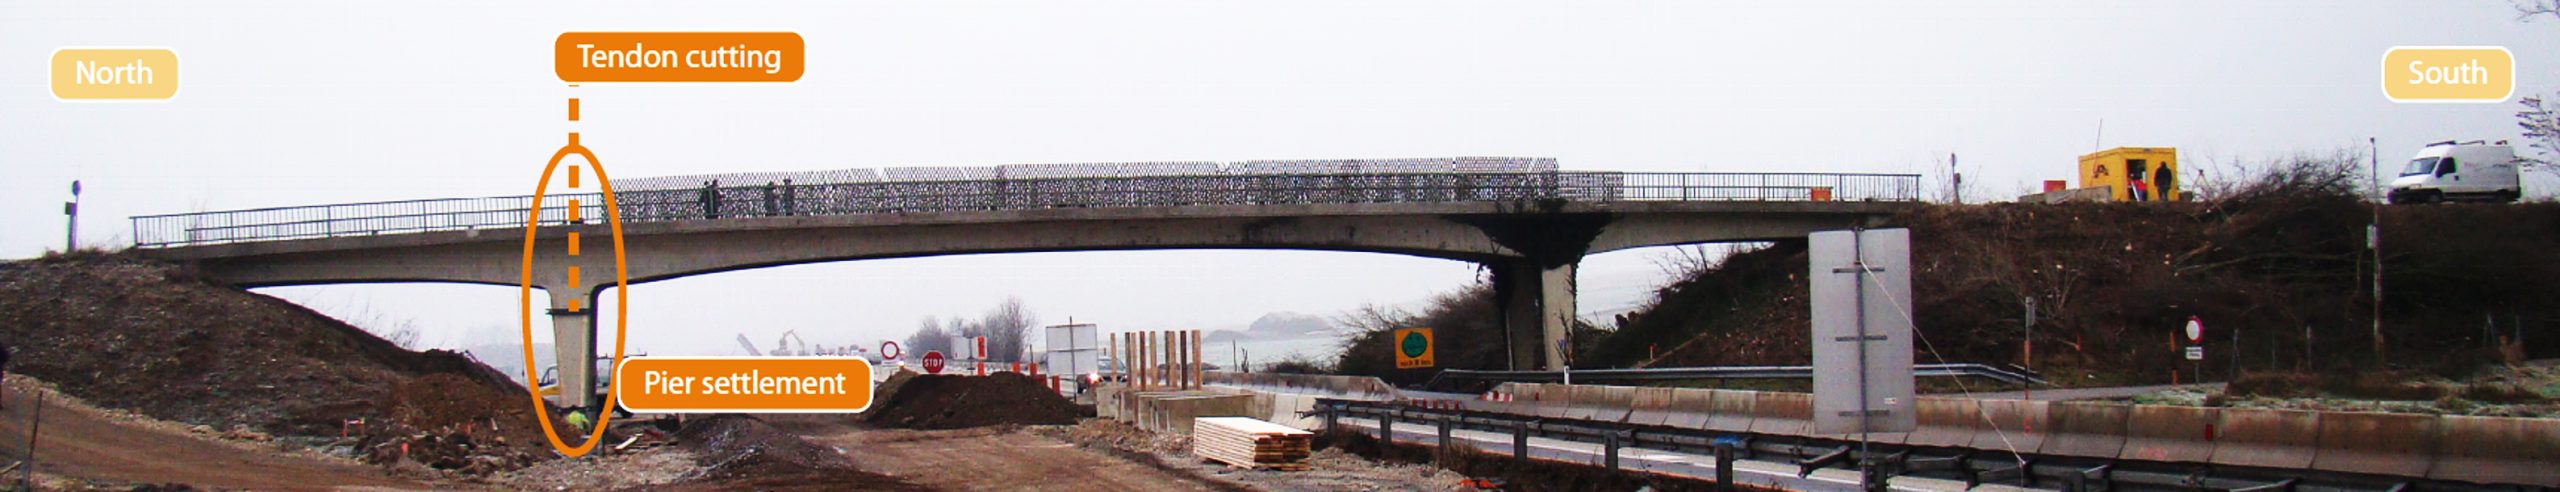 ARTeMIS-SHM for Structural Health Monitoring of the S101 Highway Bridges, Austria